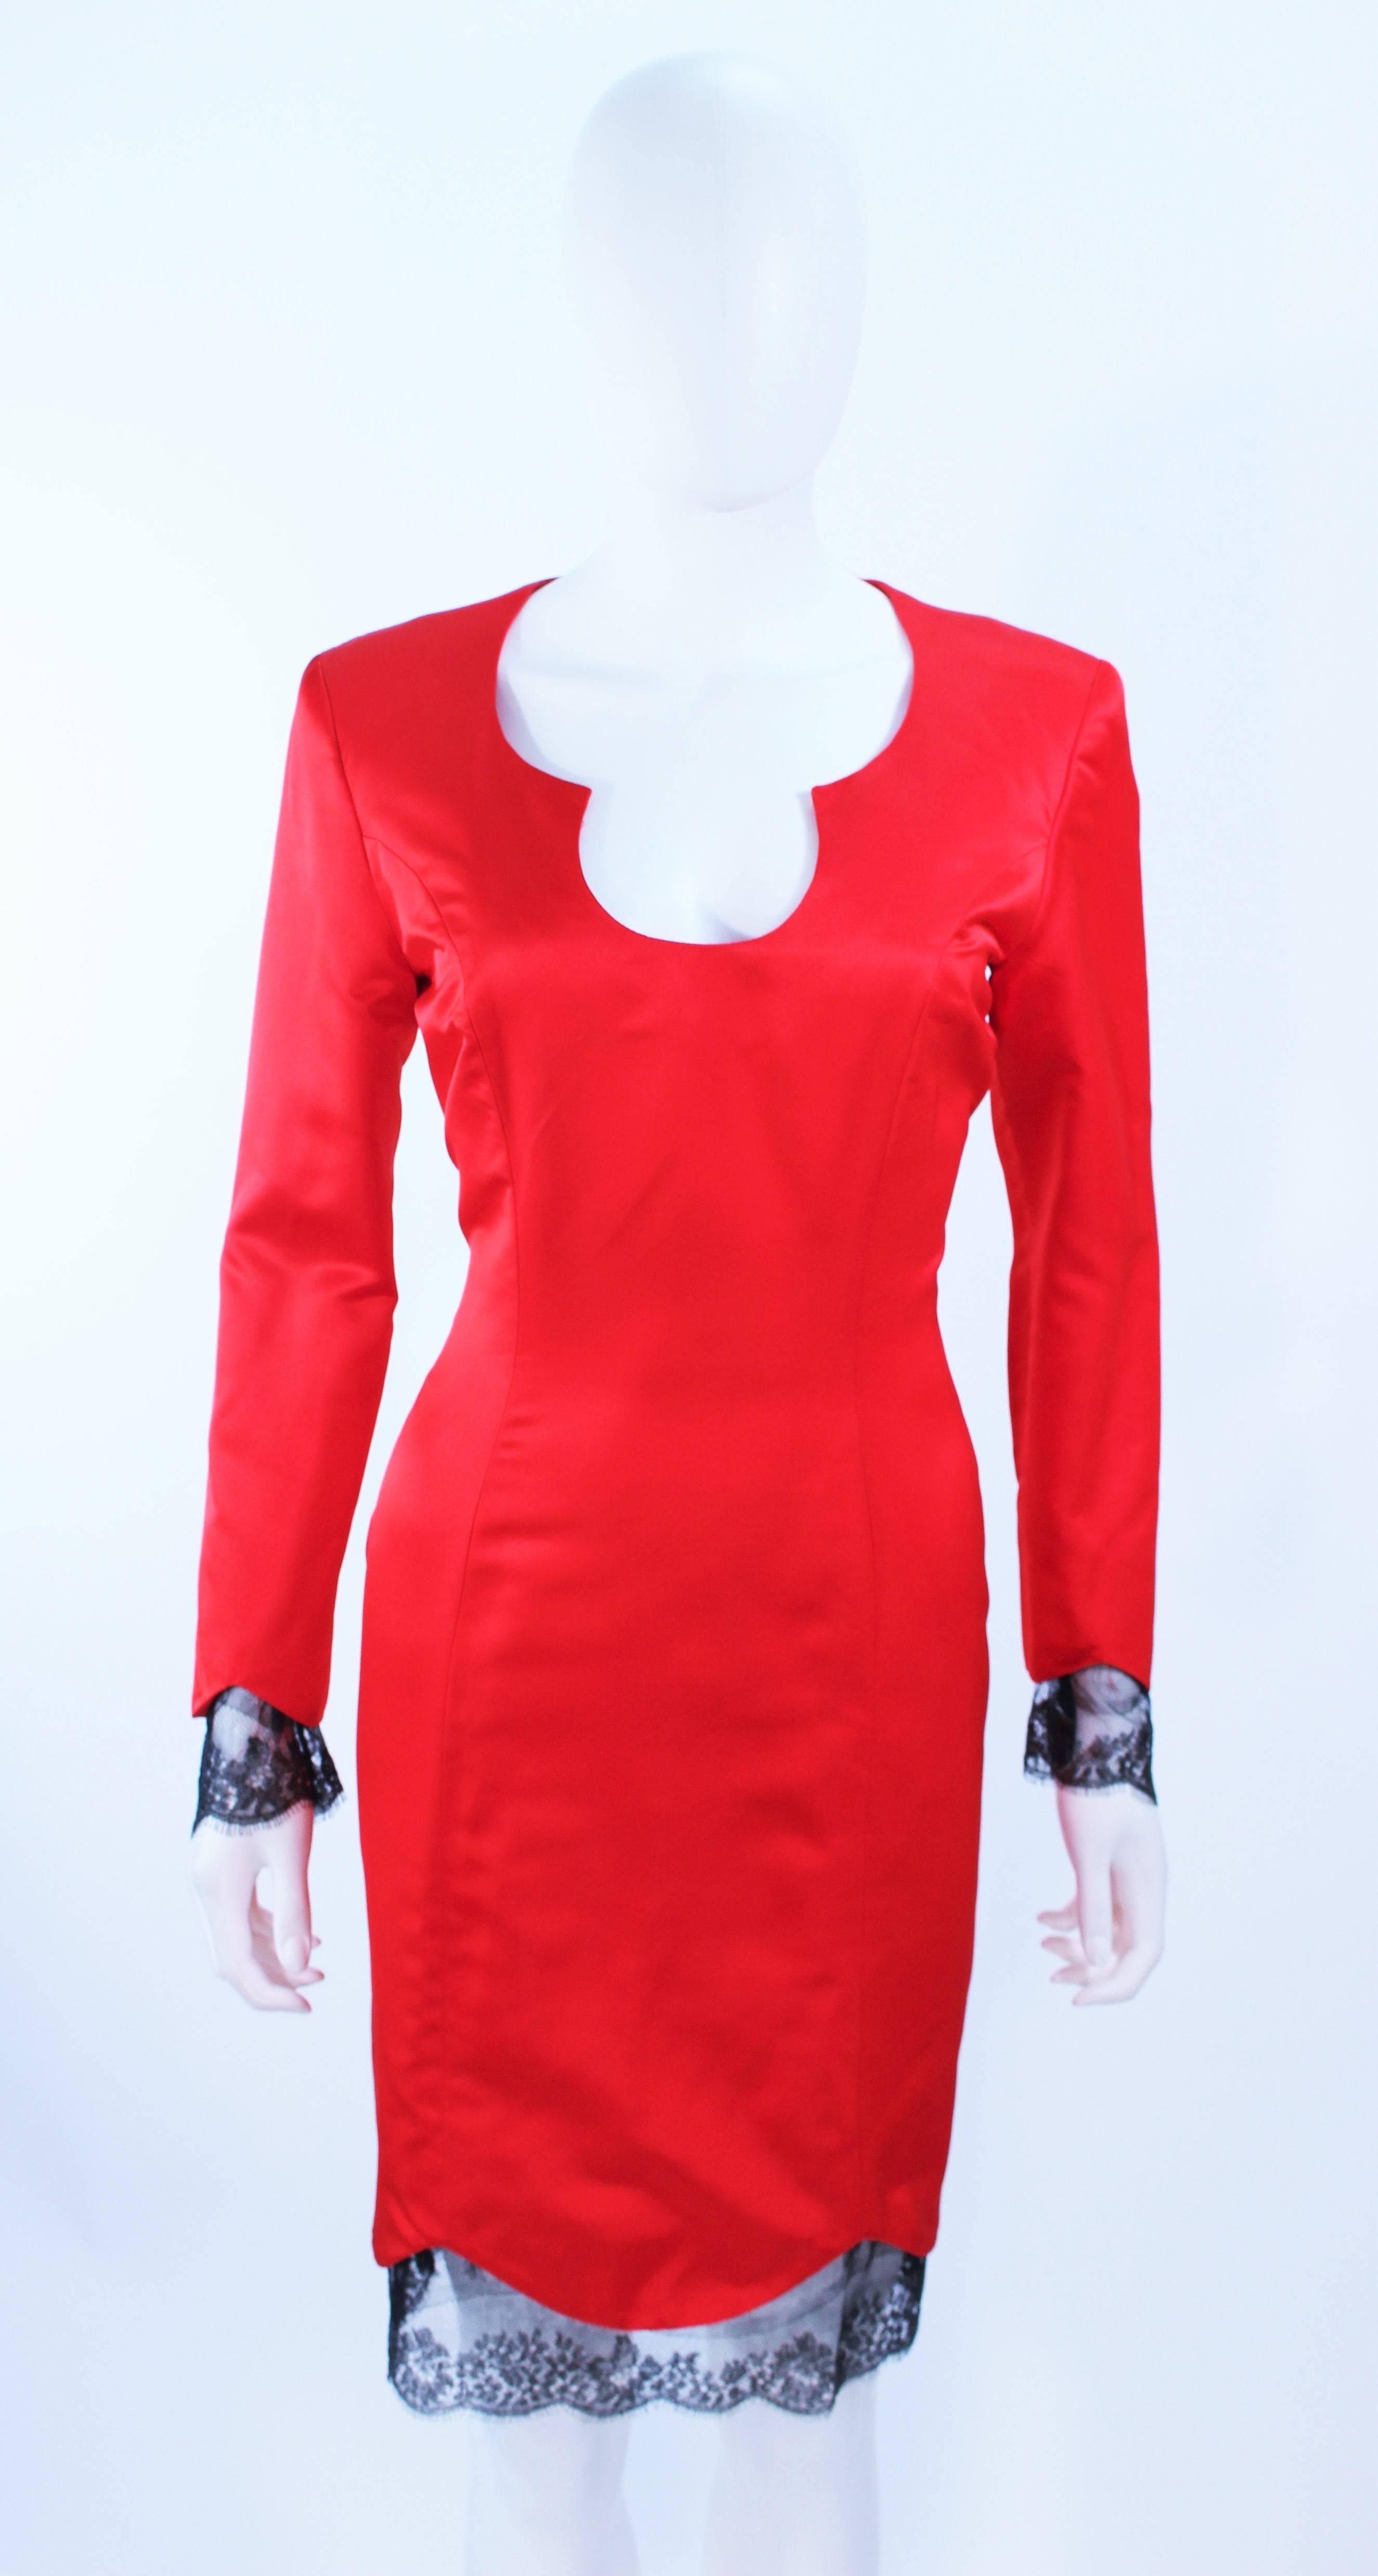 TED HEYMAN Red Silk Cocktail Dress with Lace Trim Size 8 In Excellent Condition For Sale In Los Angeles, CA